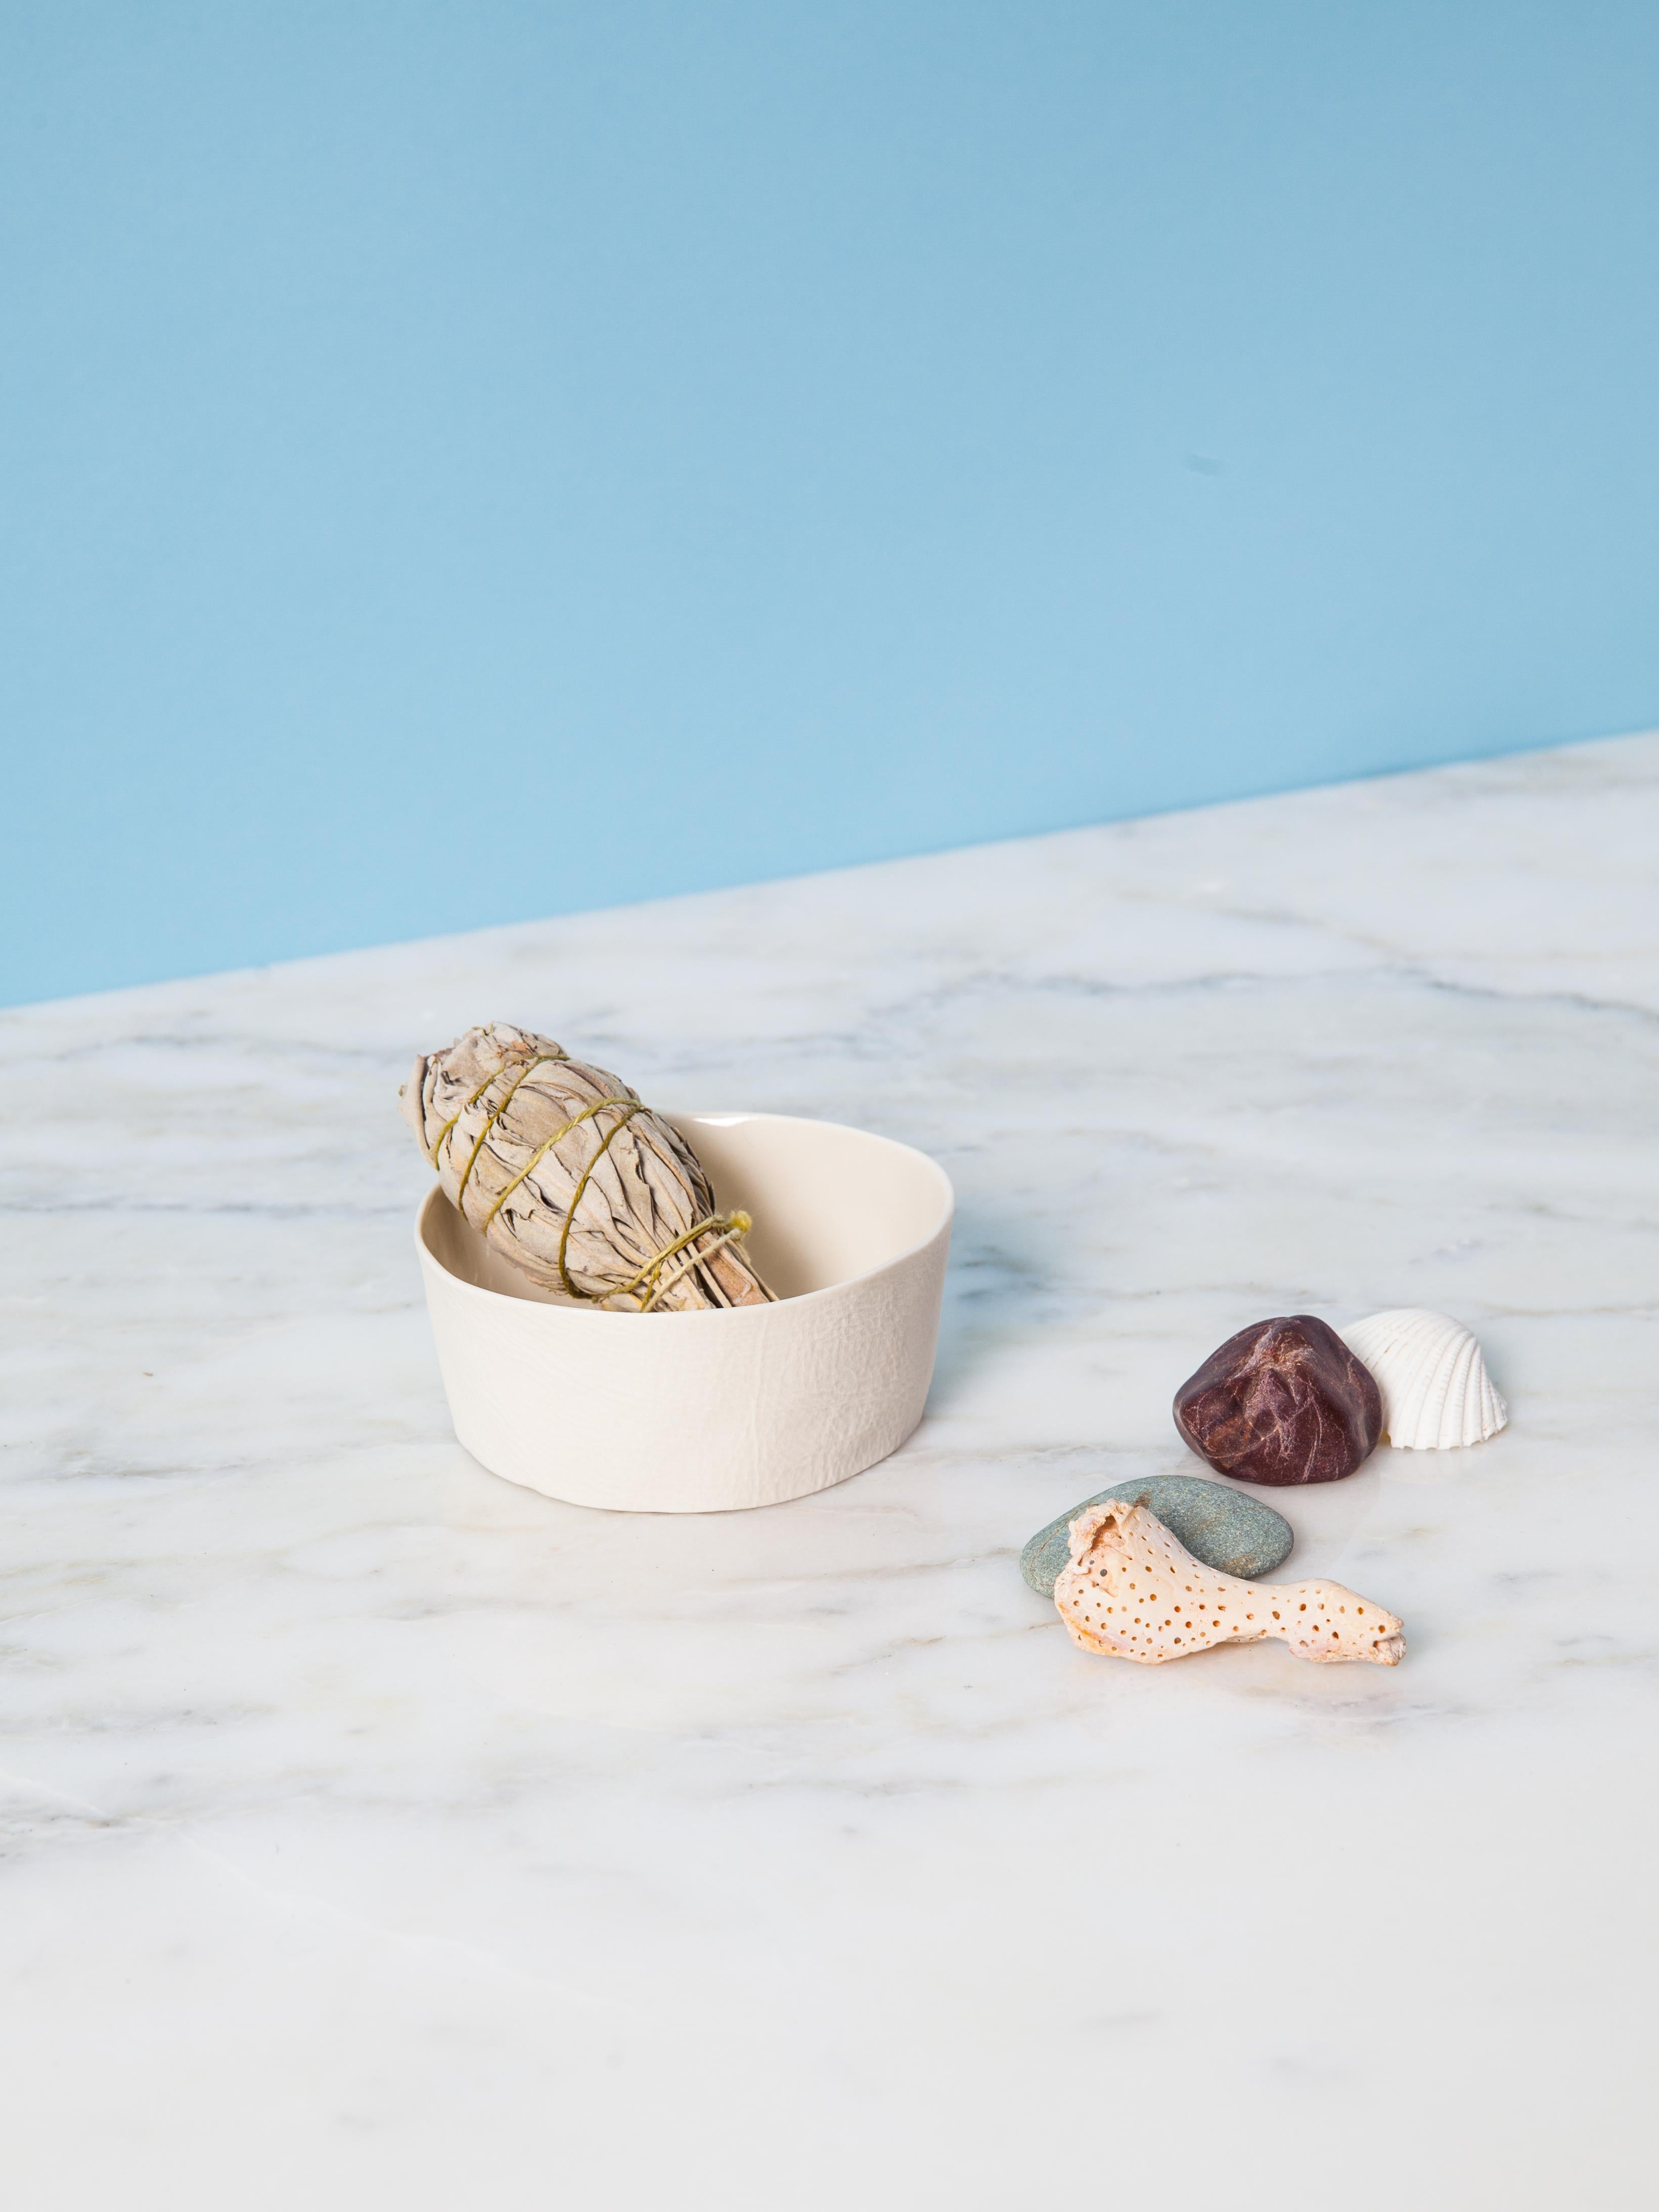 An organic shaped porcelain bowl with a tactile exterior surface and a smooth glazed interior. Small & precious, yet surprisingly practical, the Kawa Dishes are equally well-suited as a jewelry dish, salt cellar, sauces & dips bowl. As a result of